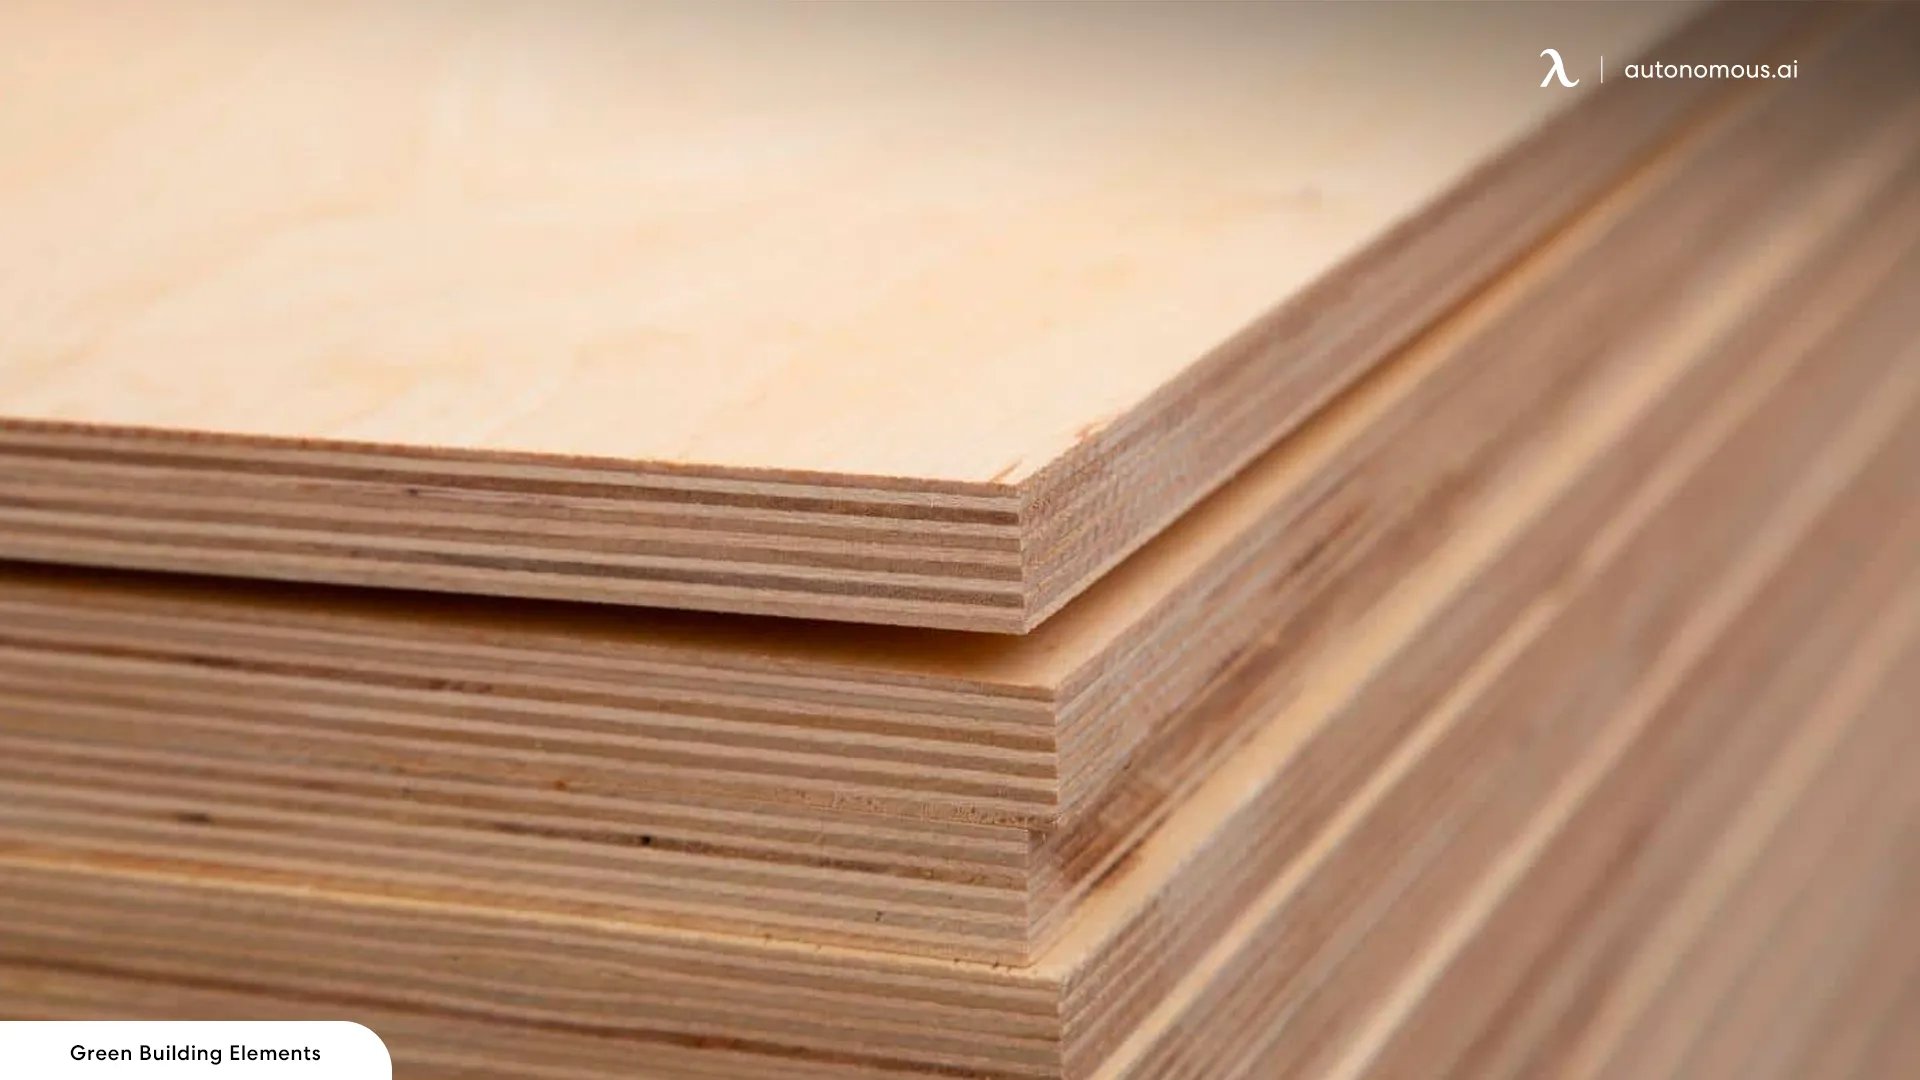 Commonly Used Forms of Manufactured Wood